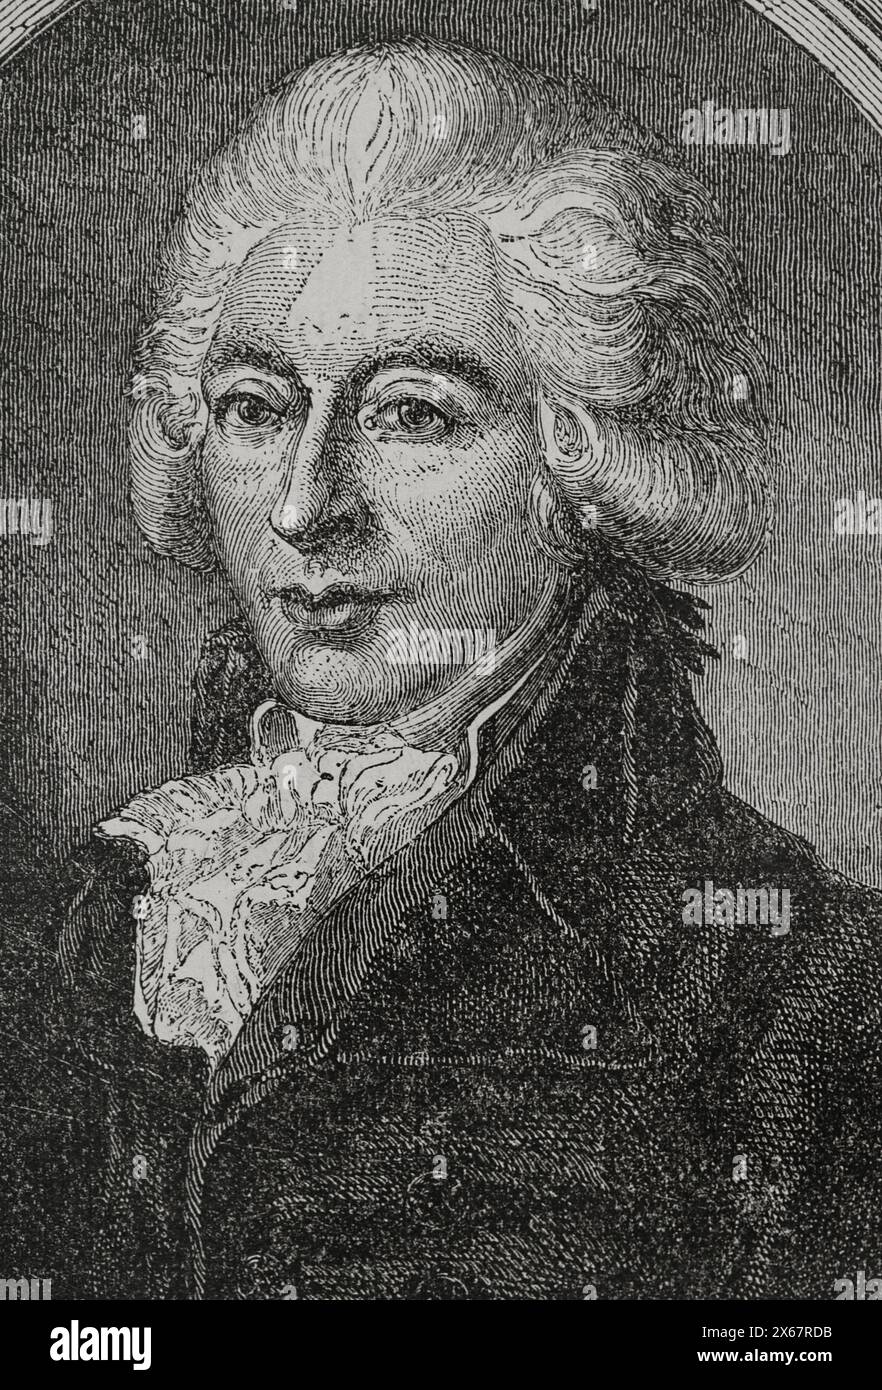 Armand Gensonné (1758-1793). French politician and deputy of the Convention. President of the National Convention (7 to 21 March 1793). Died by guillotine on 31 October 1793. Portrait. Engraving. 'History of the French Revolution'. Volume I, 1876. Stock Photo